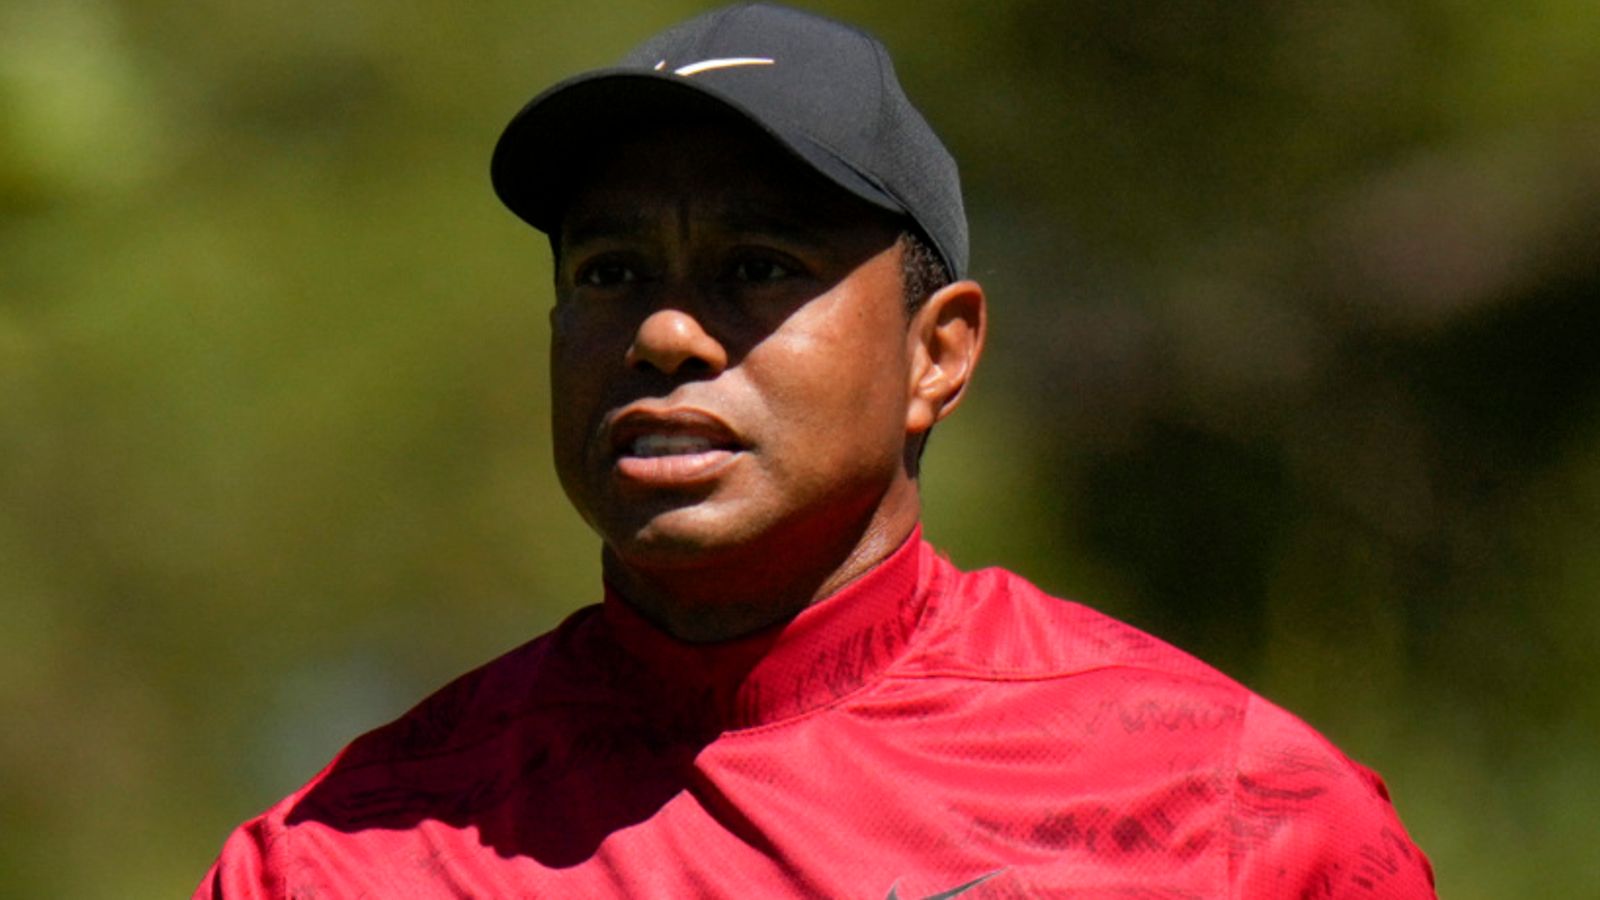 Tiger Woods’ injury timeline: Surgeries, procedures and comebacks during his career